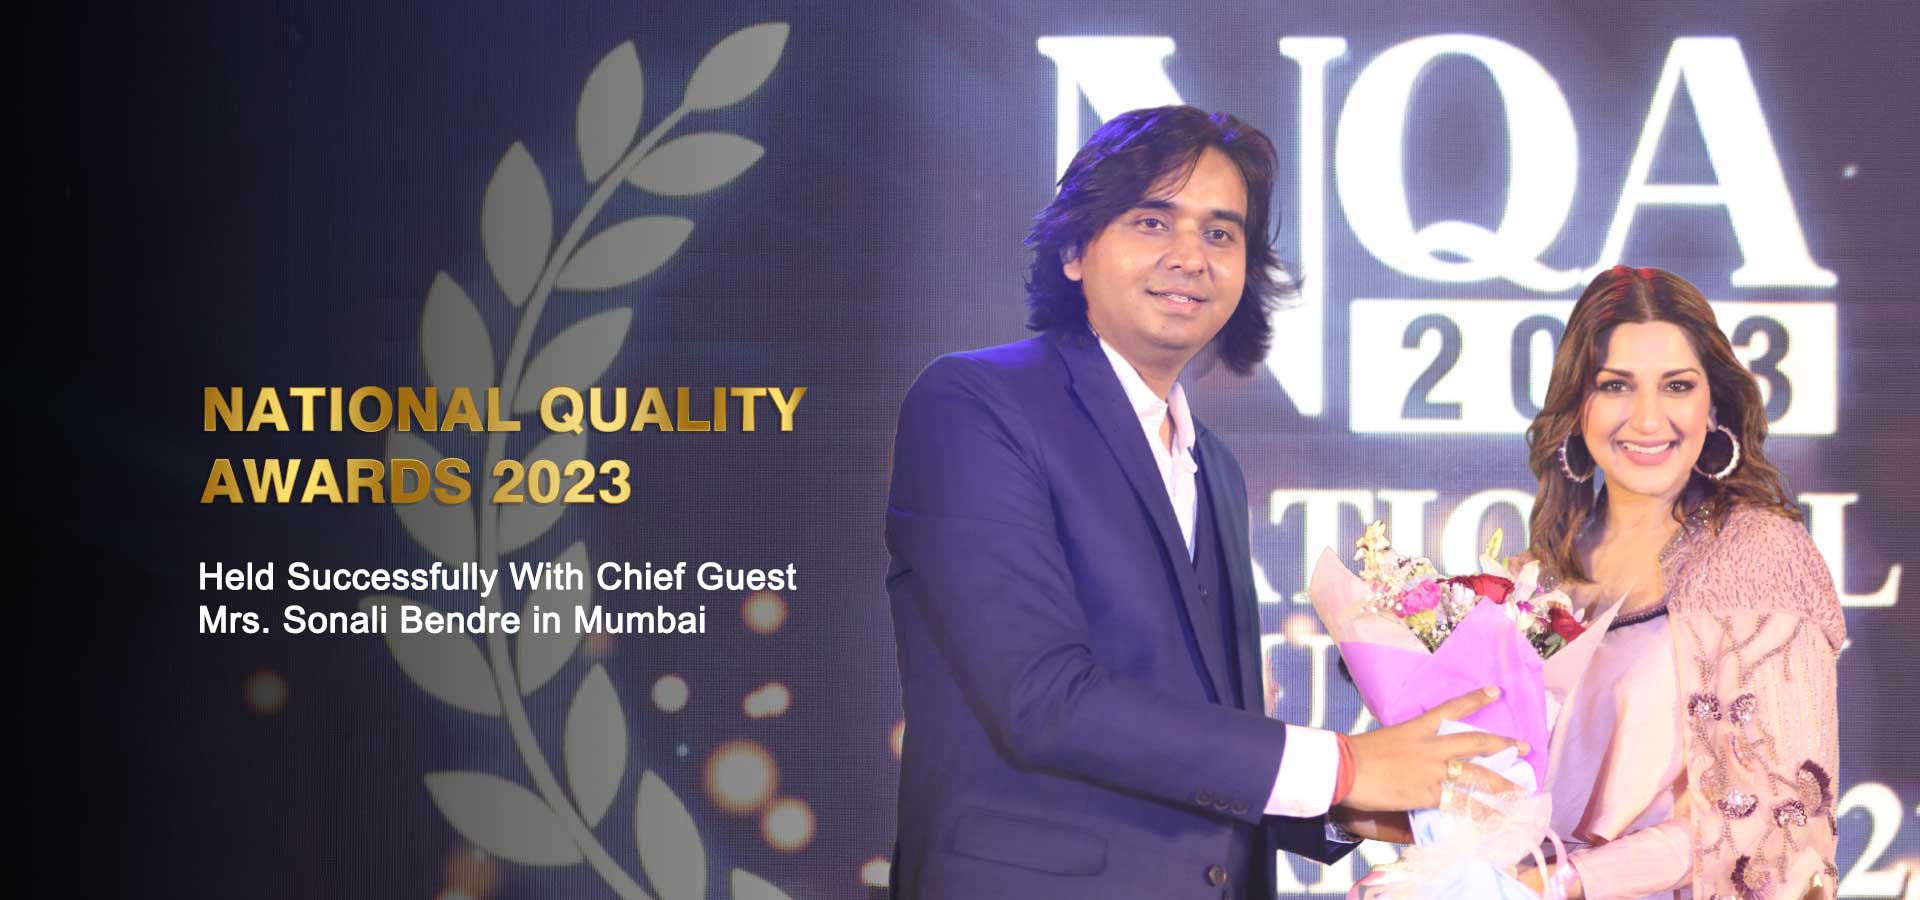 National Quality Awards 2023 Completed Successfully